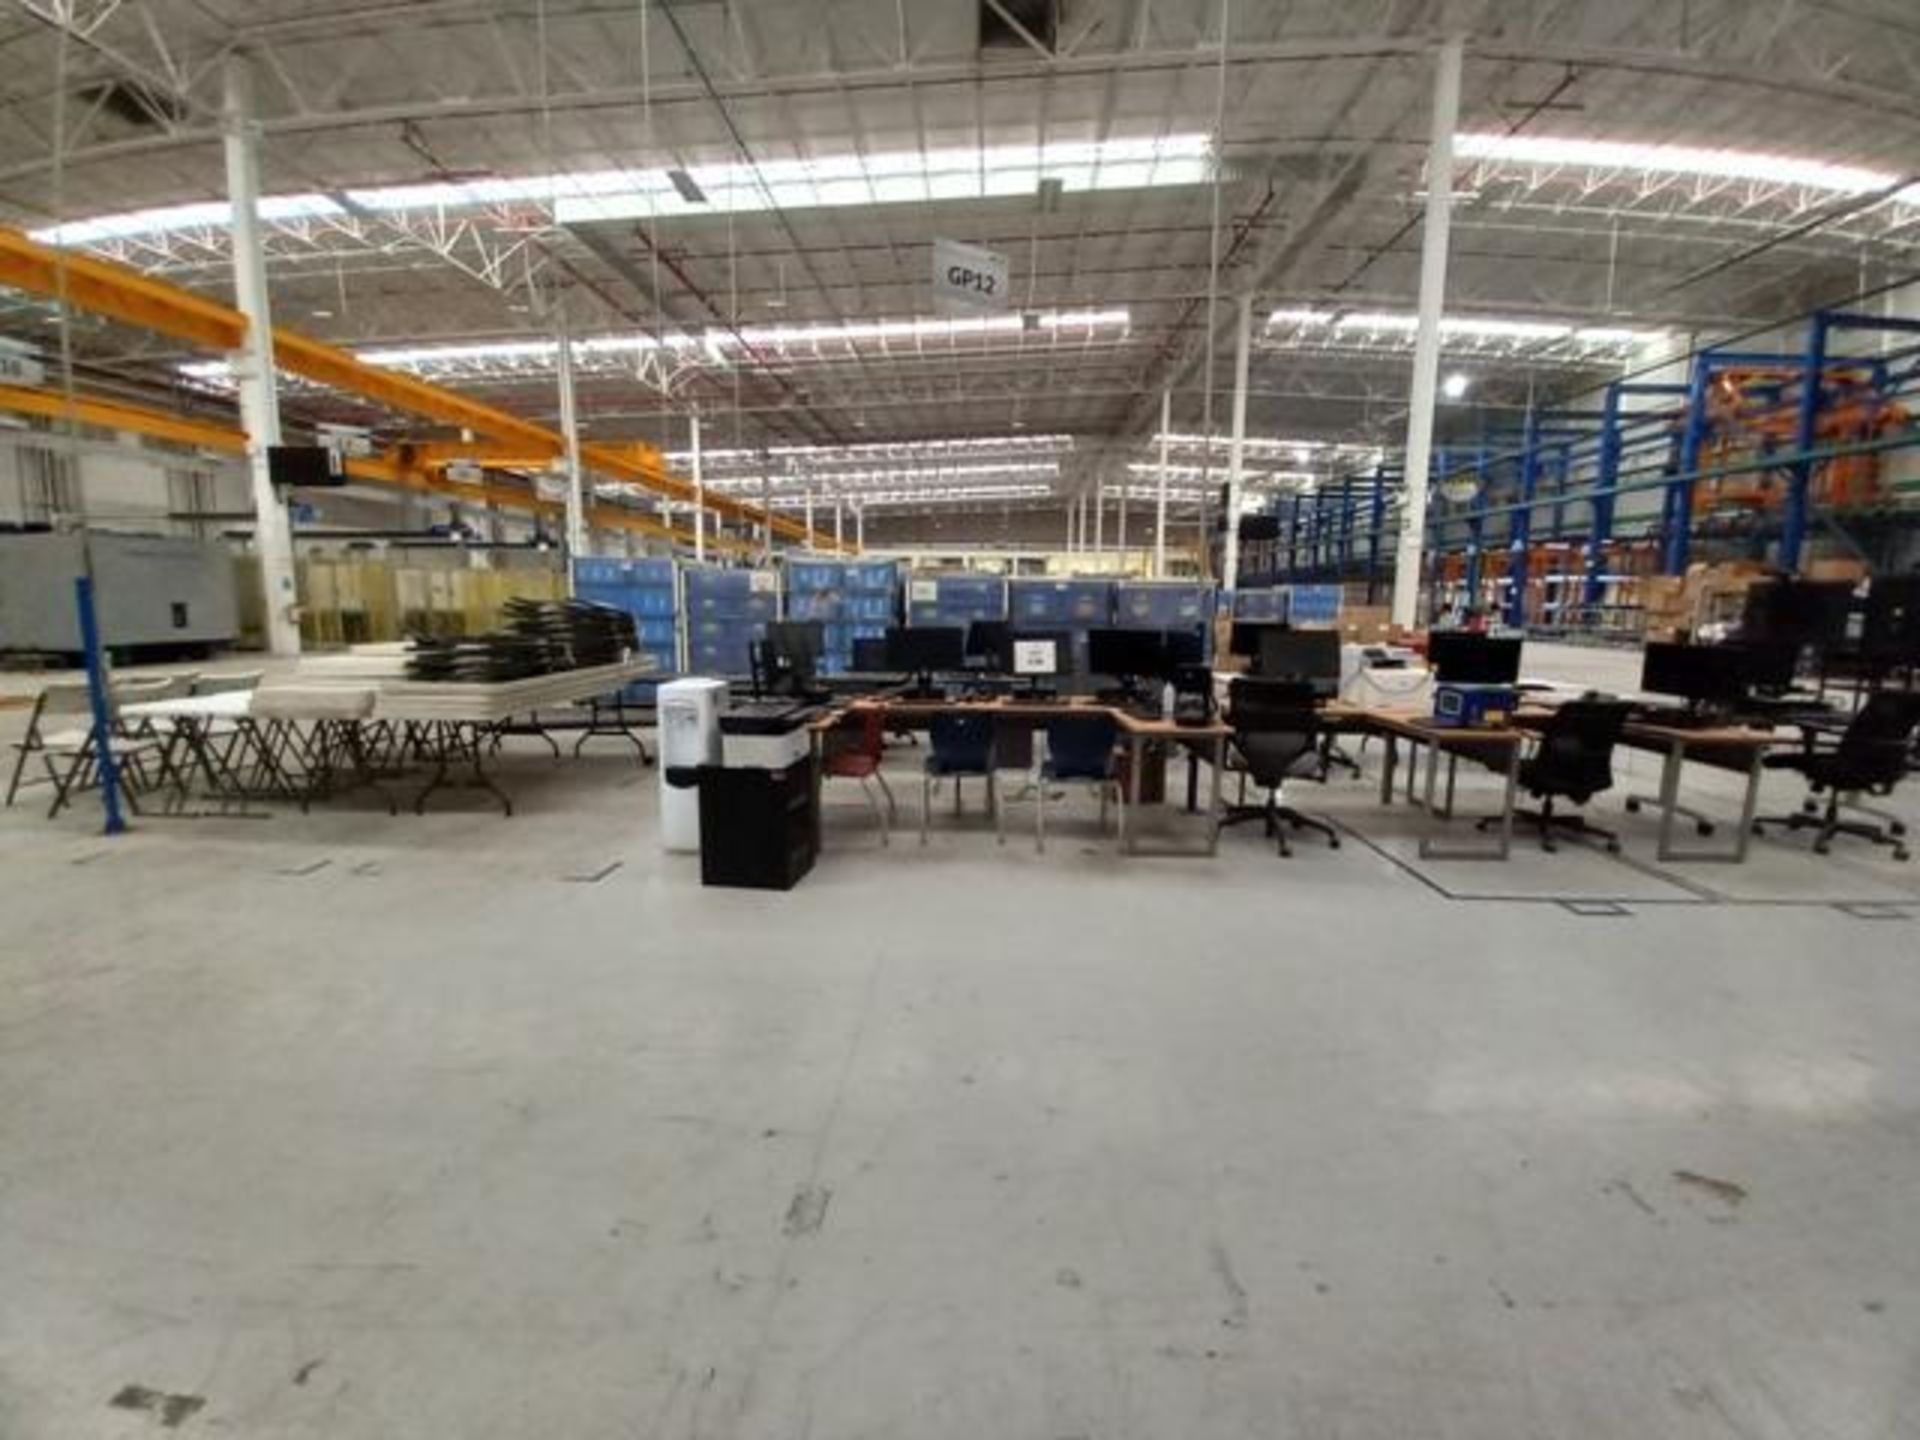 LOT: (66) Of Furniture and Computing Equipment Consisting of: Computers, Printers, Desks, Chairs, Dr - Image 21 of 38